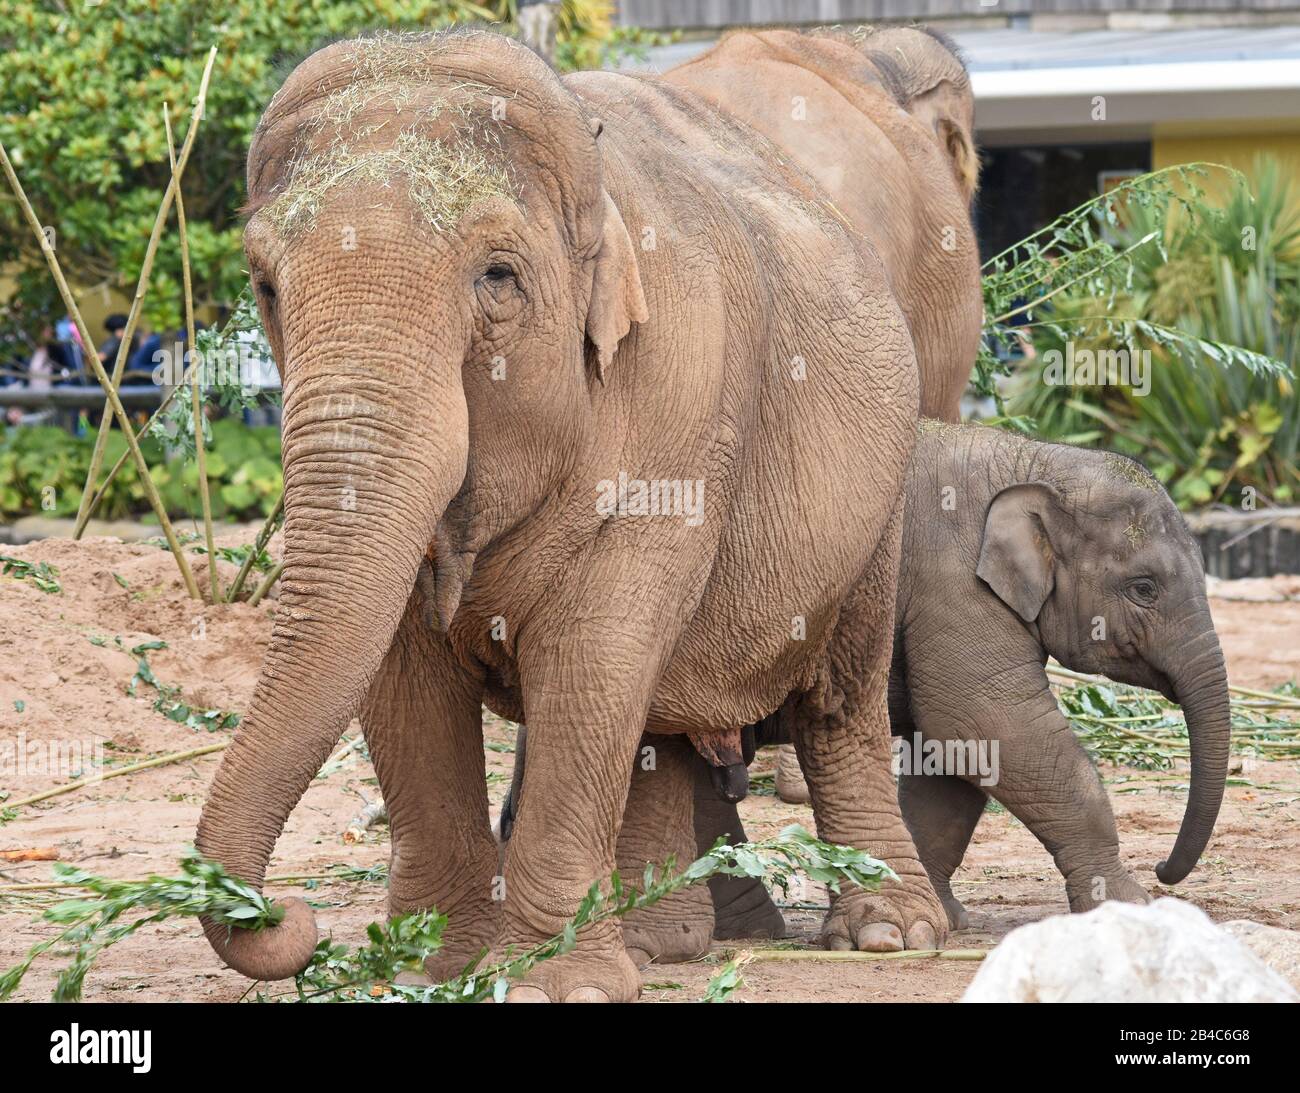 Mother and Baby Elephant in Zoo Enclosure Stock Photo